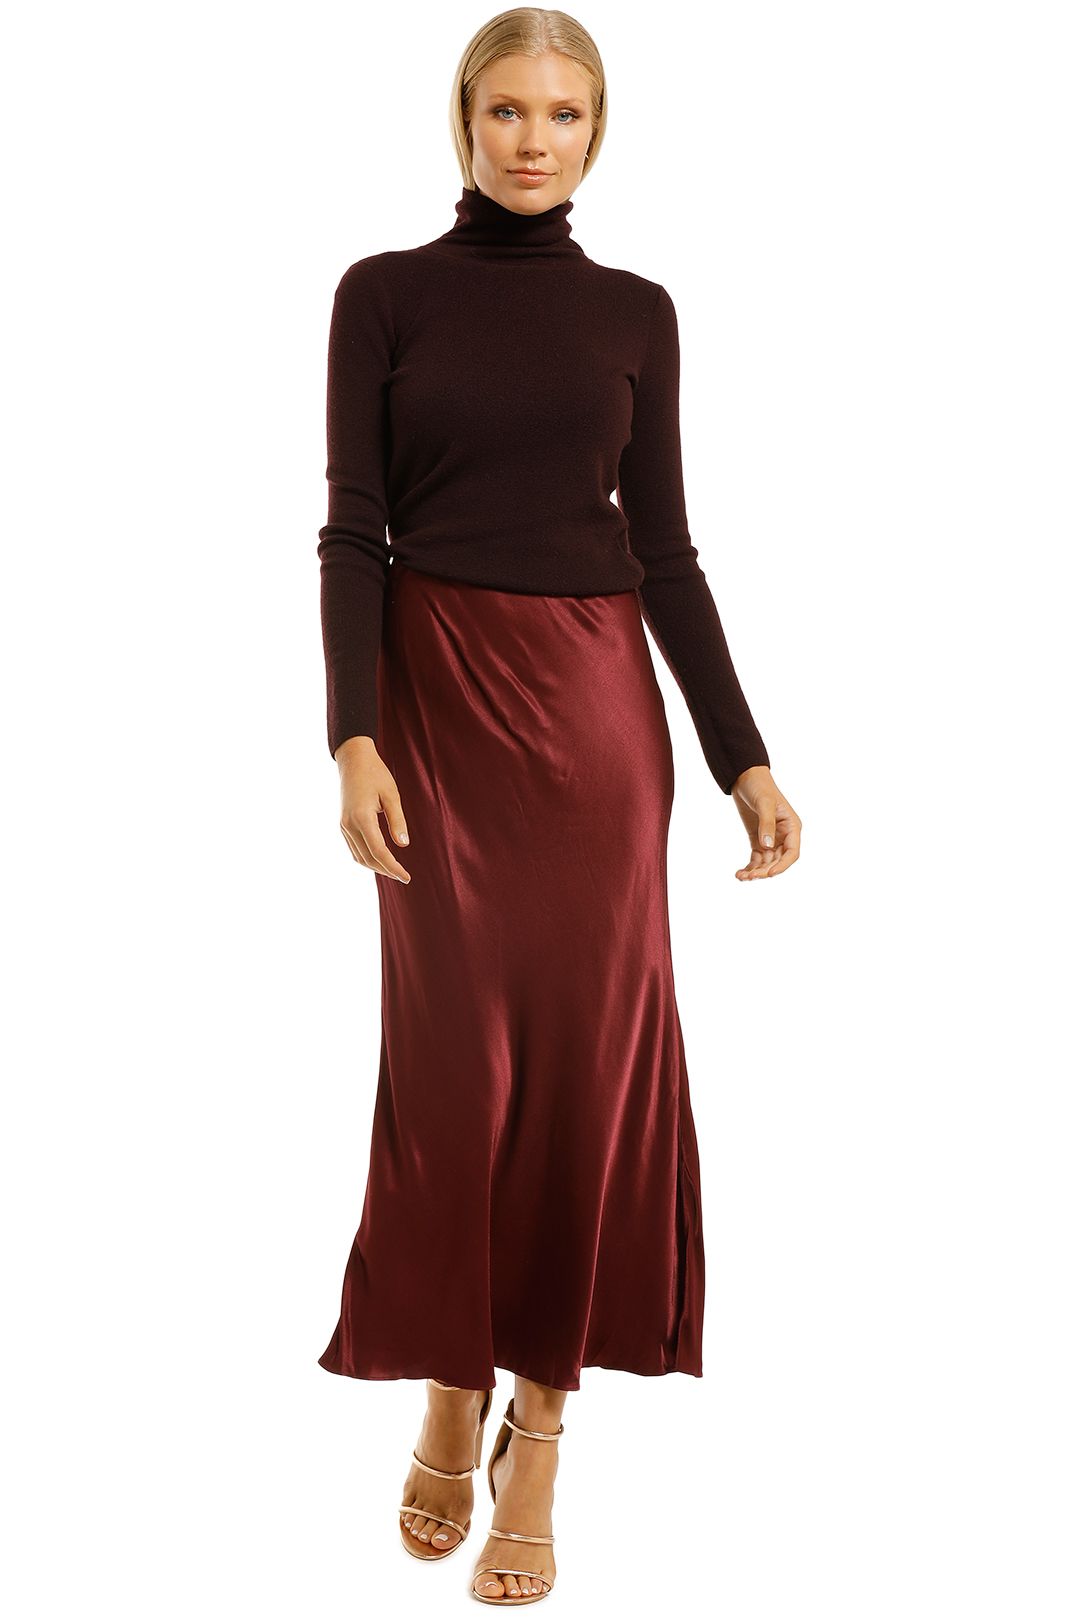 The-East-Order-Katia-Skirt-Wine-Front